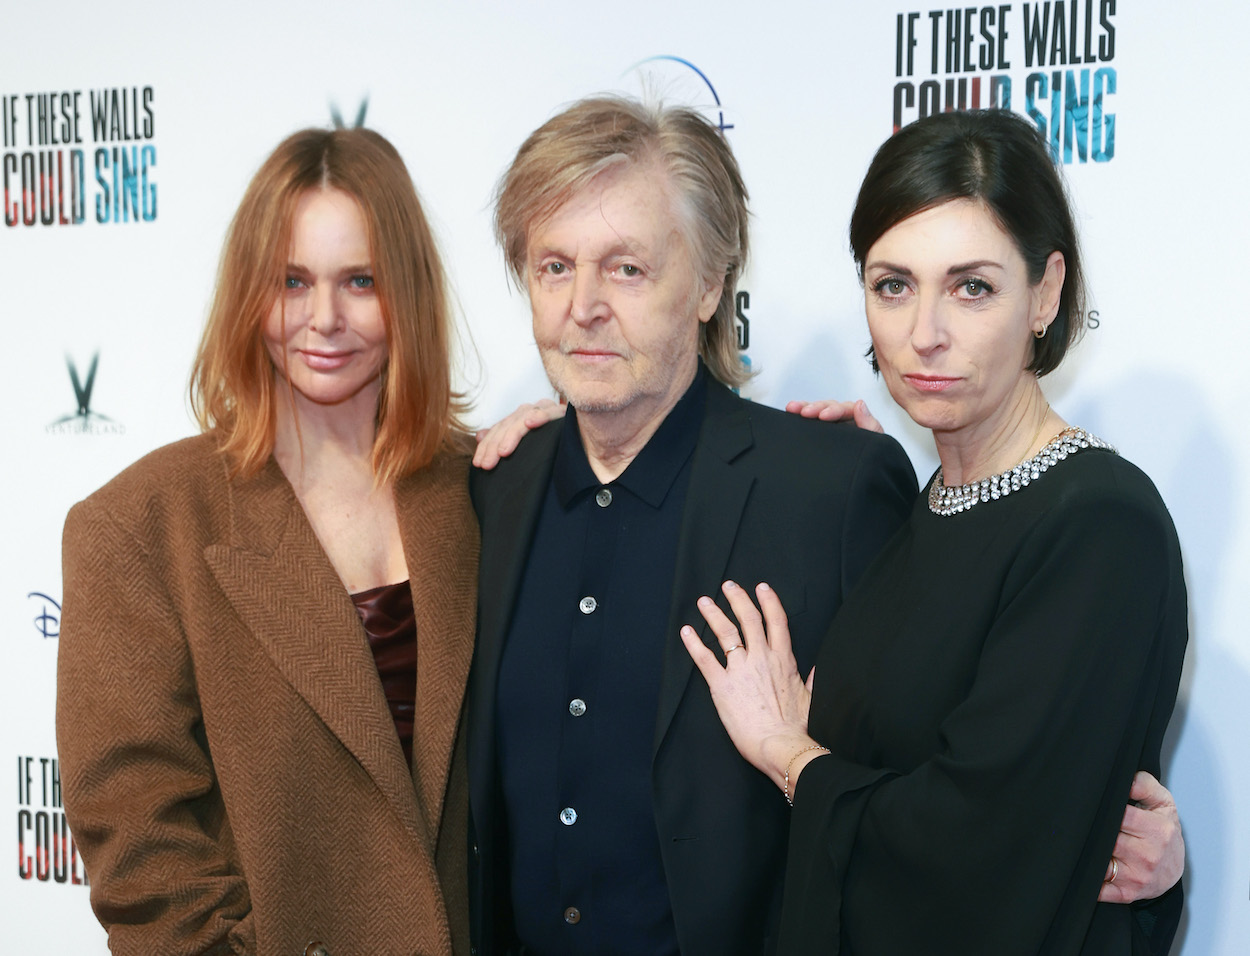 Paul McCartney (center) with daughters Stella (left) and Mary, who directed the Abbey Road Studios documentary 'If These Walls Could Sing' and rediscovered her love for the building.